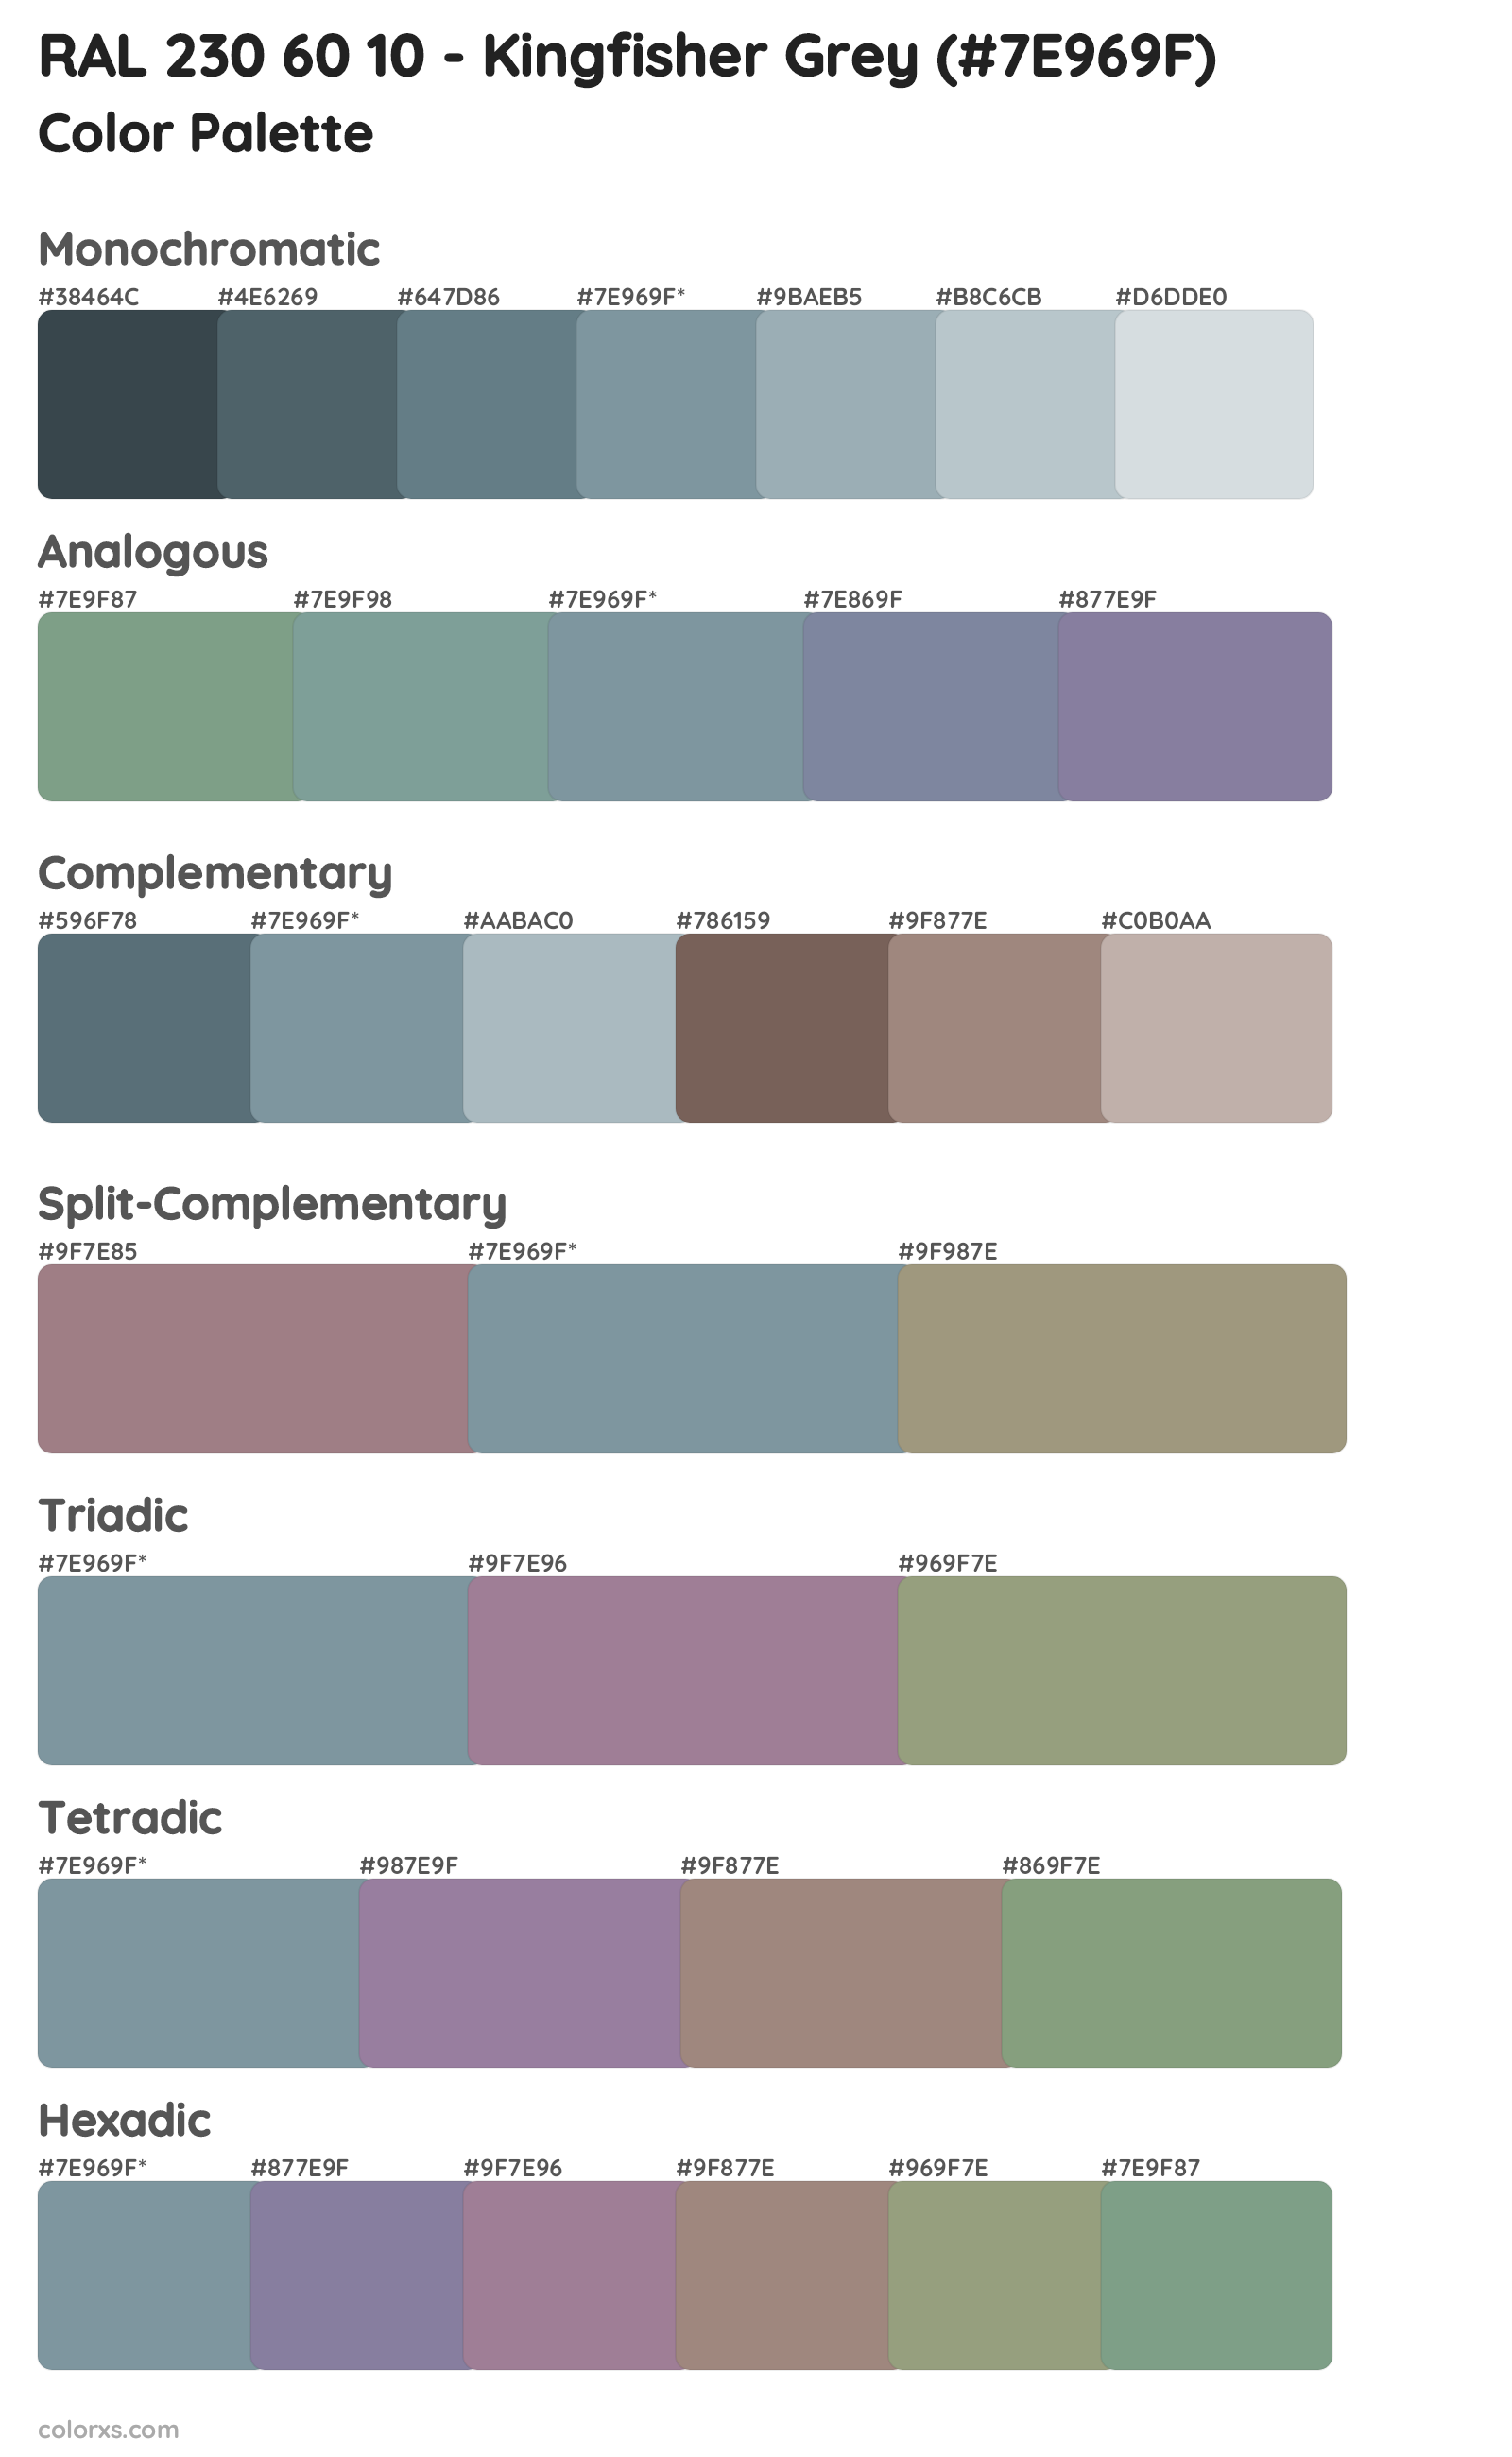 RAL 230 60 10 - Kingfisher Grey Color Scheme Palettes